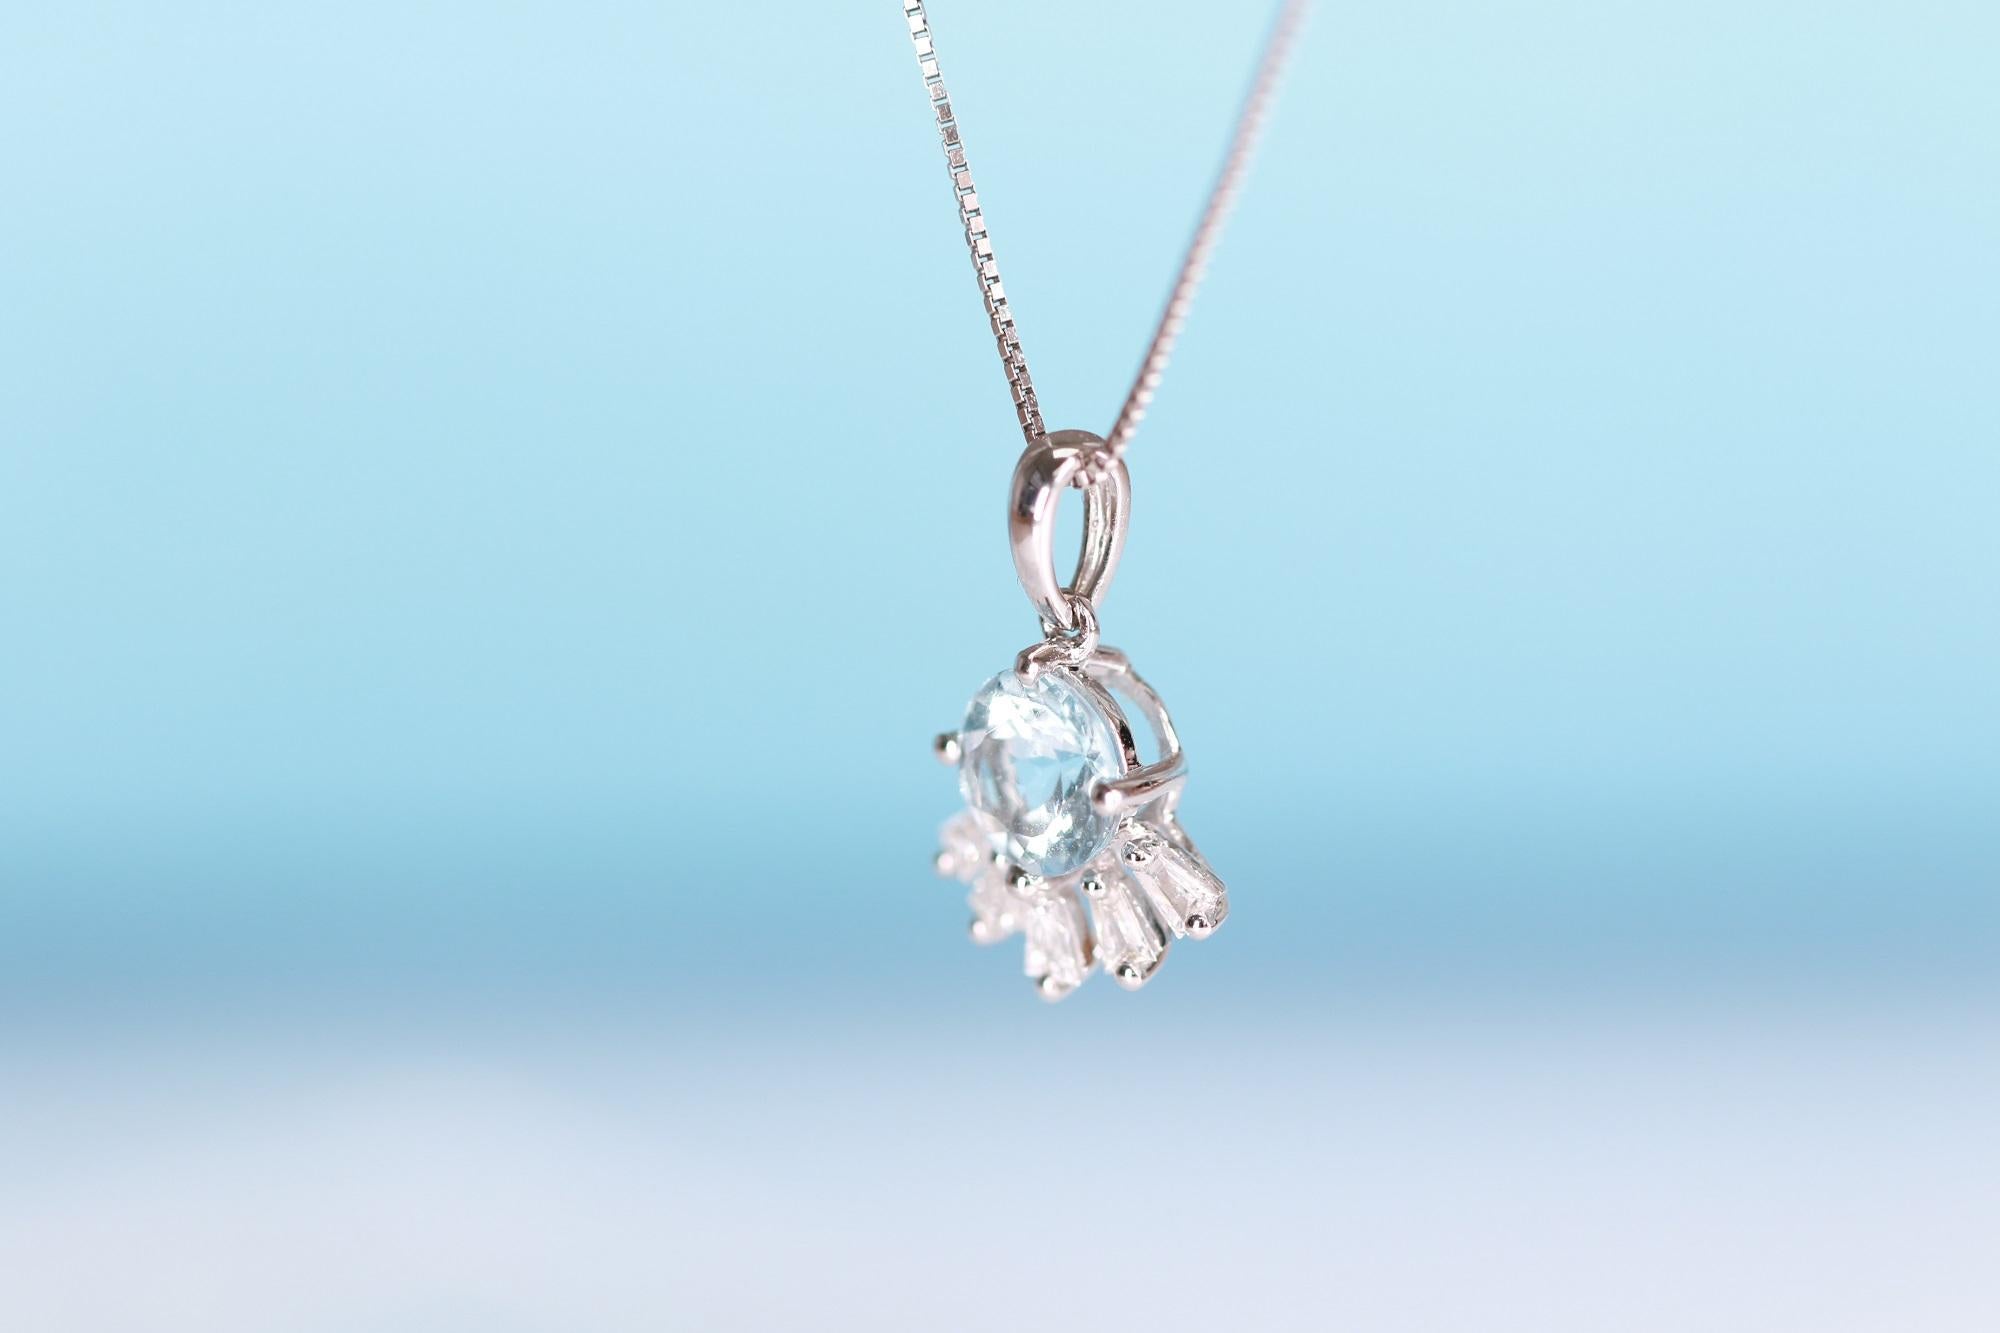 Stunning, timeless and classy eternity Unique Pendant. Decorate yourself in luxury with this Gin & Grace Pendant. The 18k White Gold jewelry boasts Round Cut Prong Setting Genuine Aquamarine (1 pcs) 0.72 Carat, along with Natural Baguette cut white